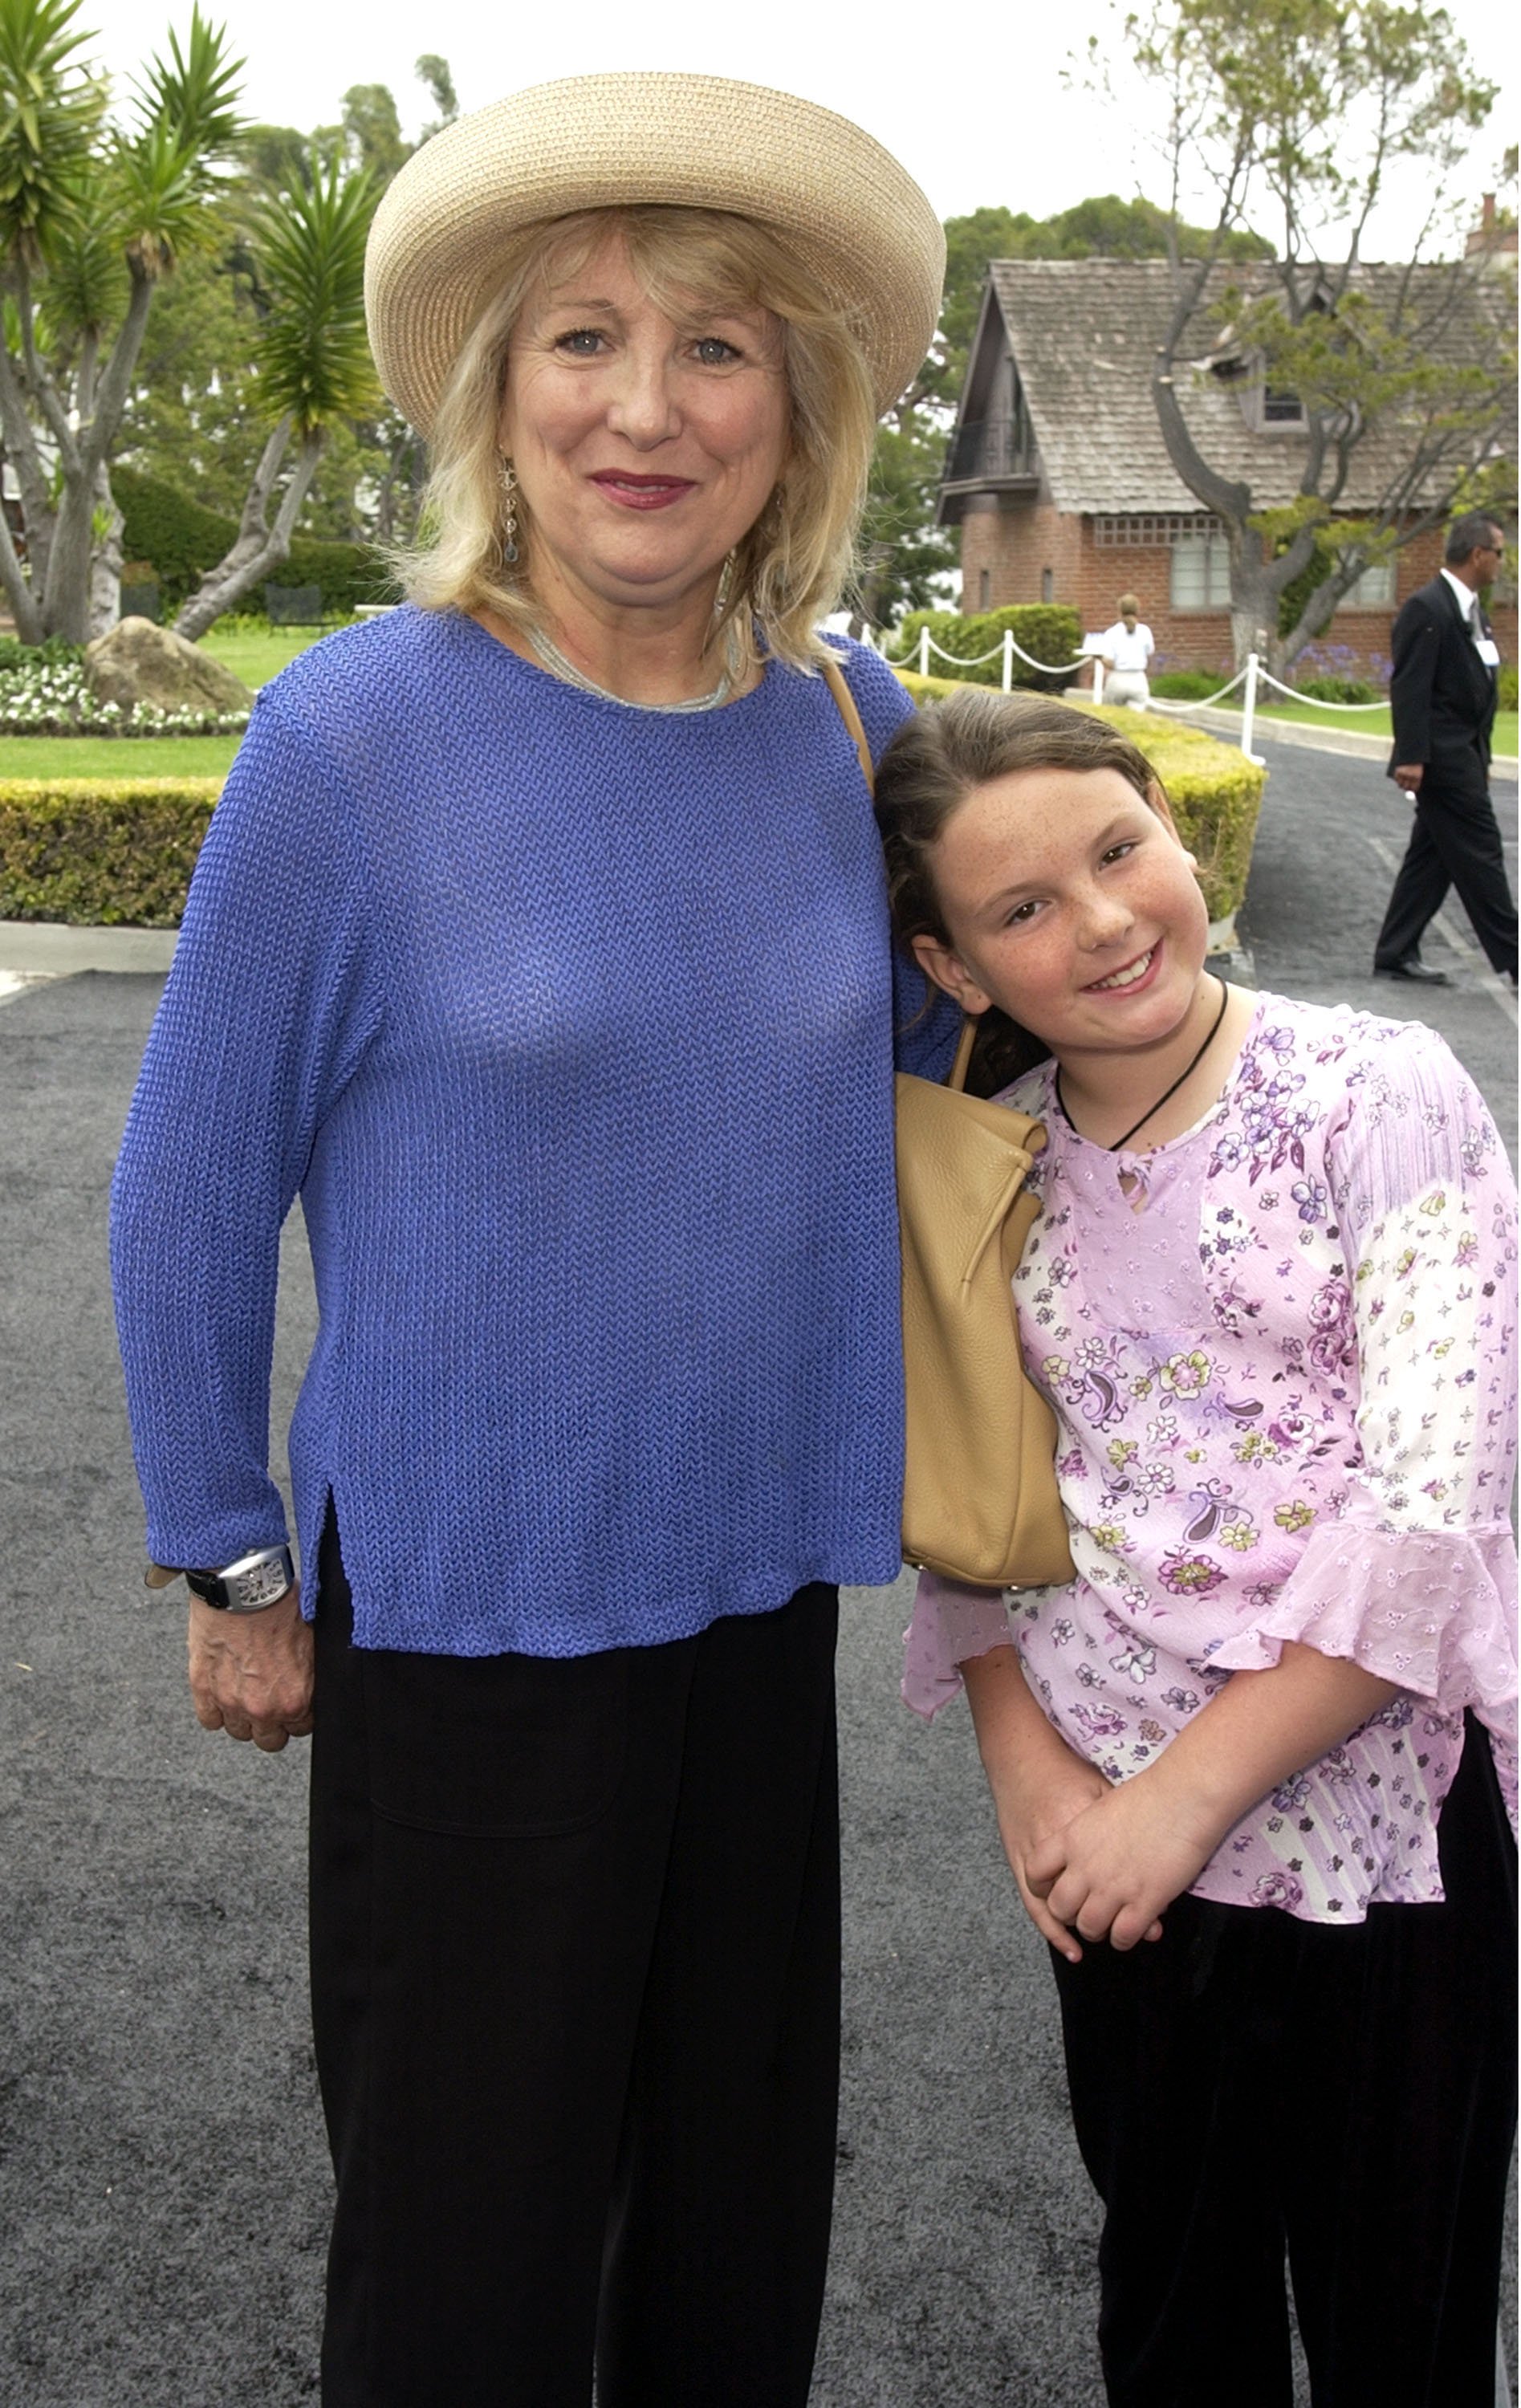 Teri Garr and daughter Molly O'Neil during 6th Annual "QVC's Cure by the Shore" to Benefit the National Multiple Sclerosis Society at Private Residence in Malibu, California, United States | Source: Getty Images